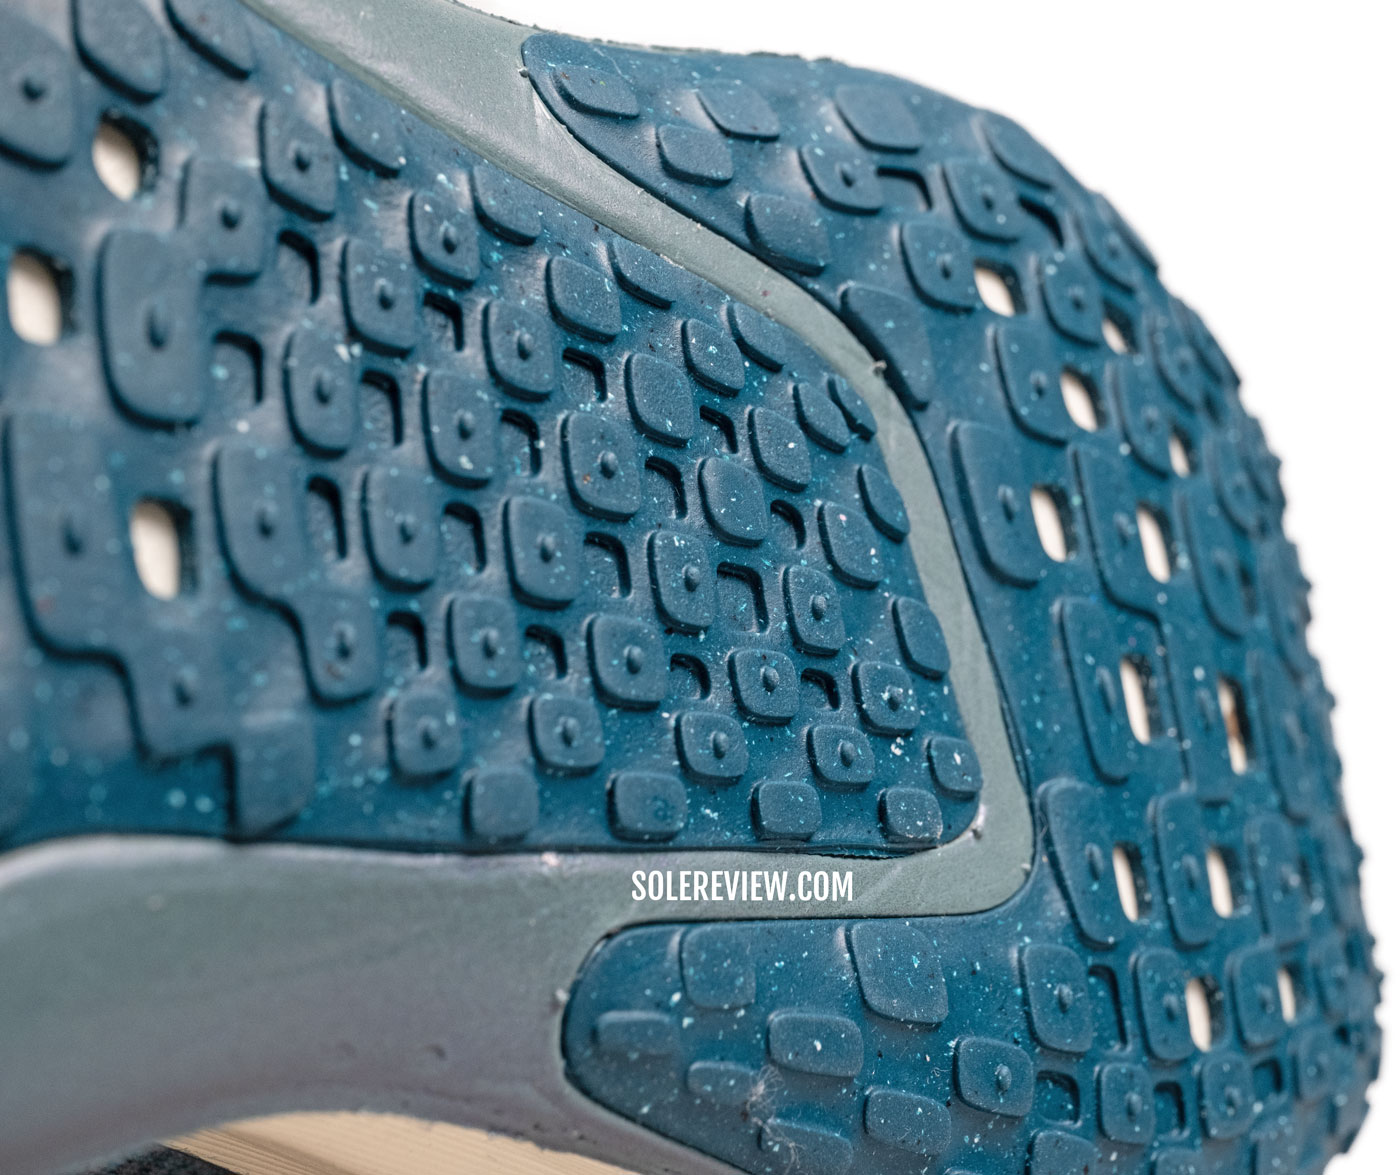 The rearfoot outsole of the Nike Invincible Run 3.